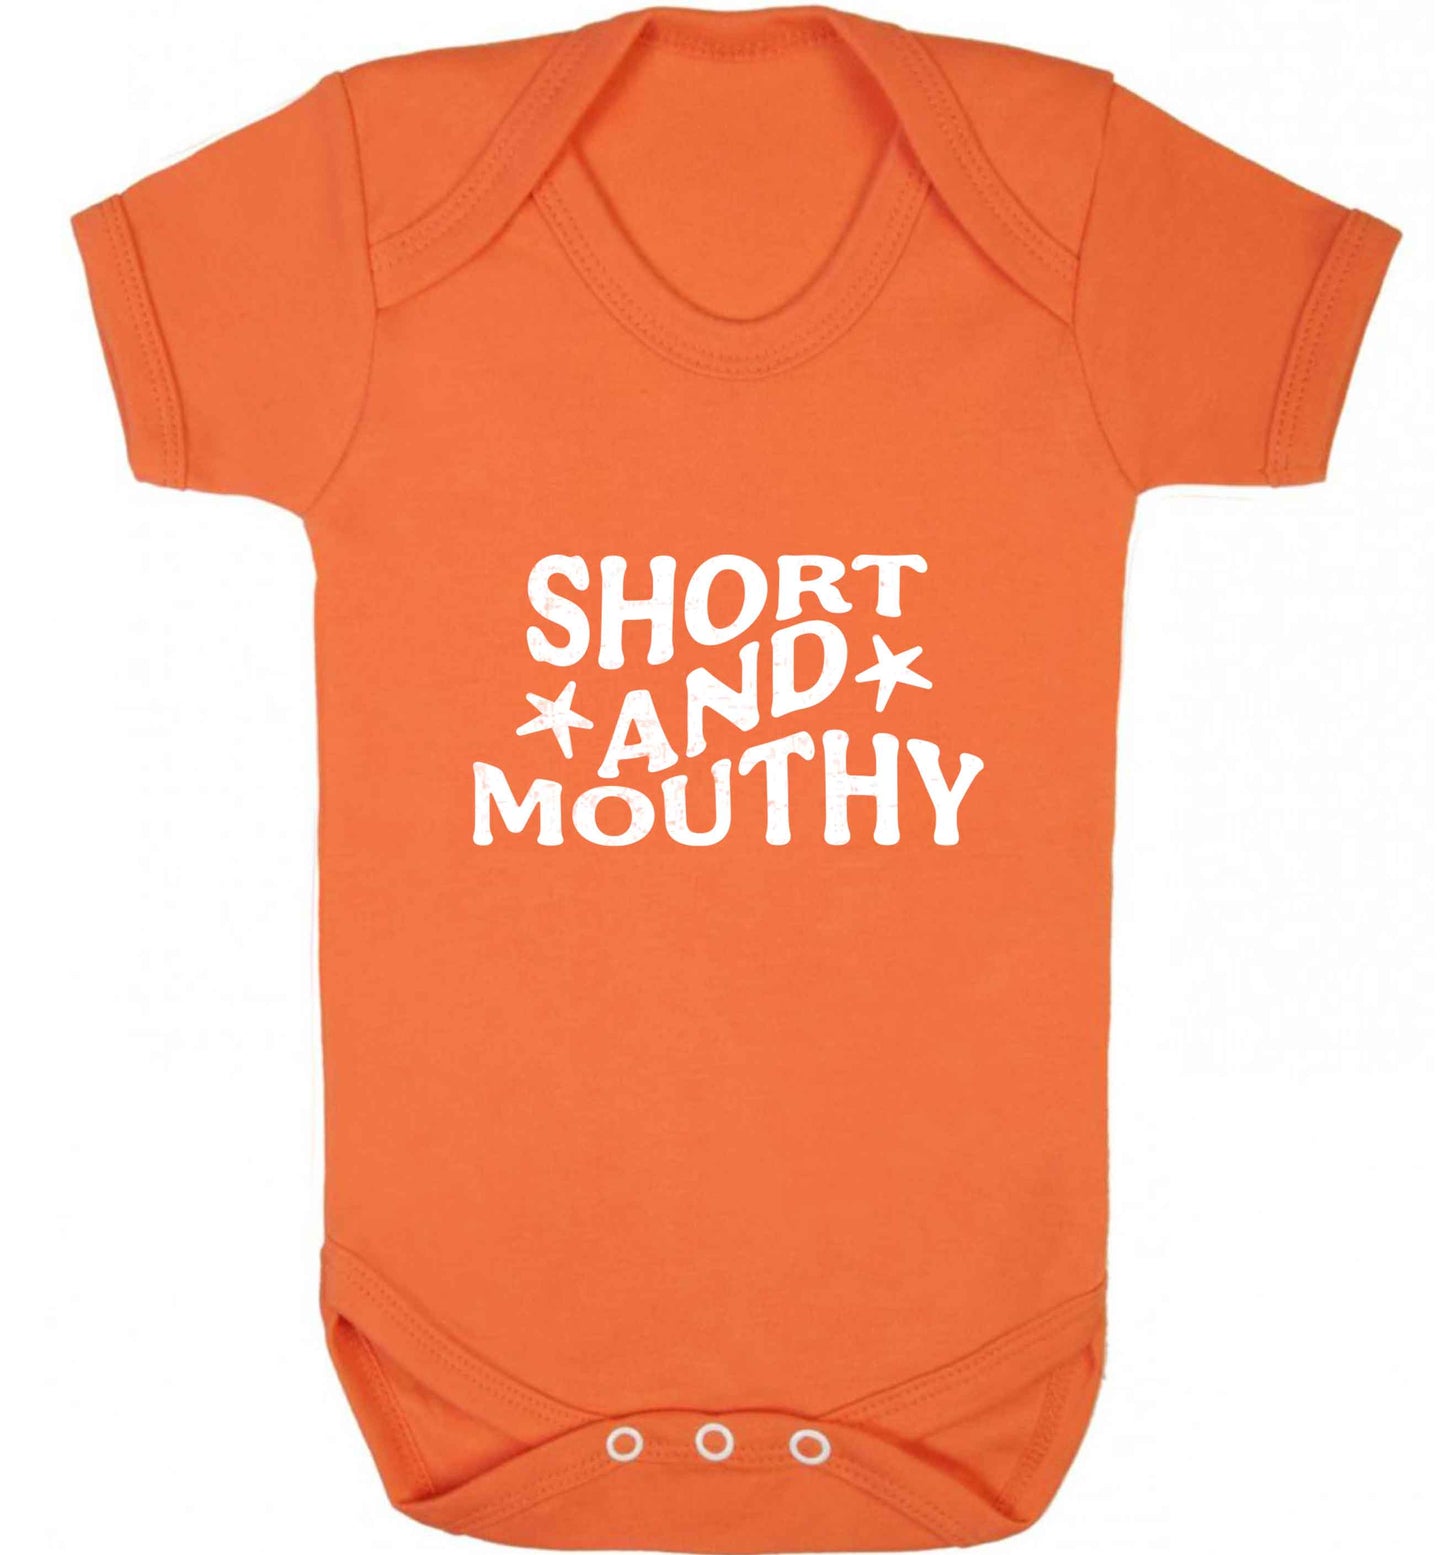 Short and mouthy baby vest orange 18-24 months